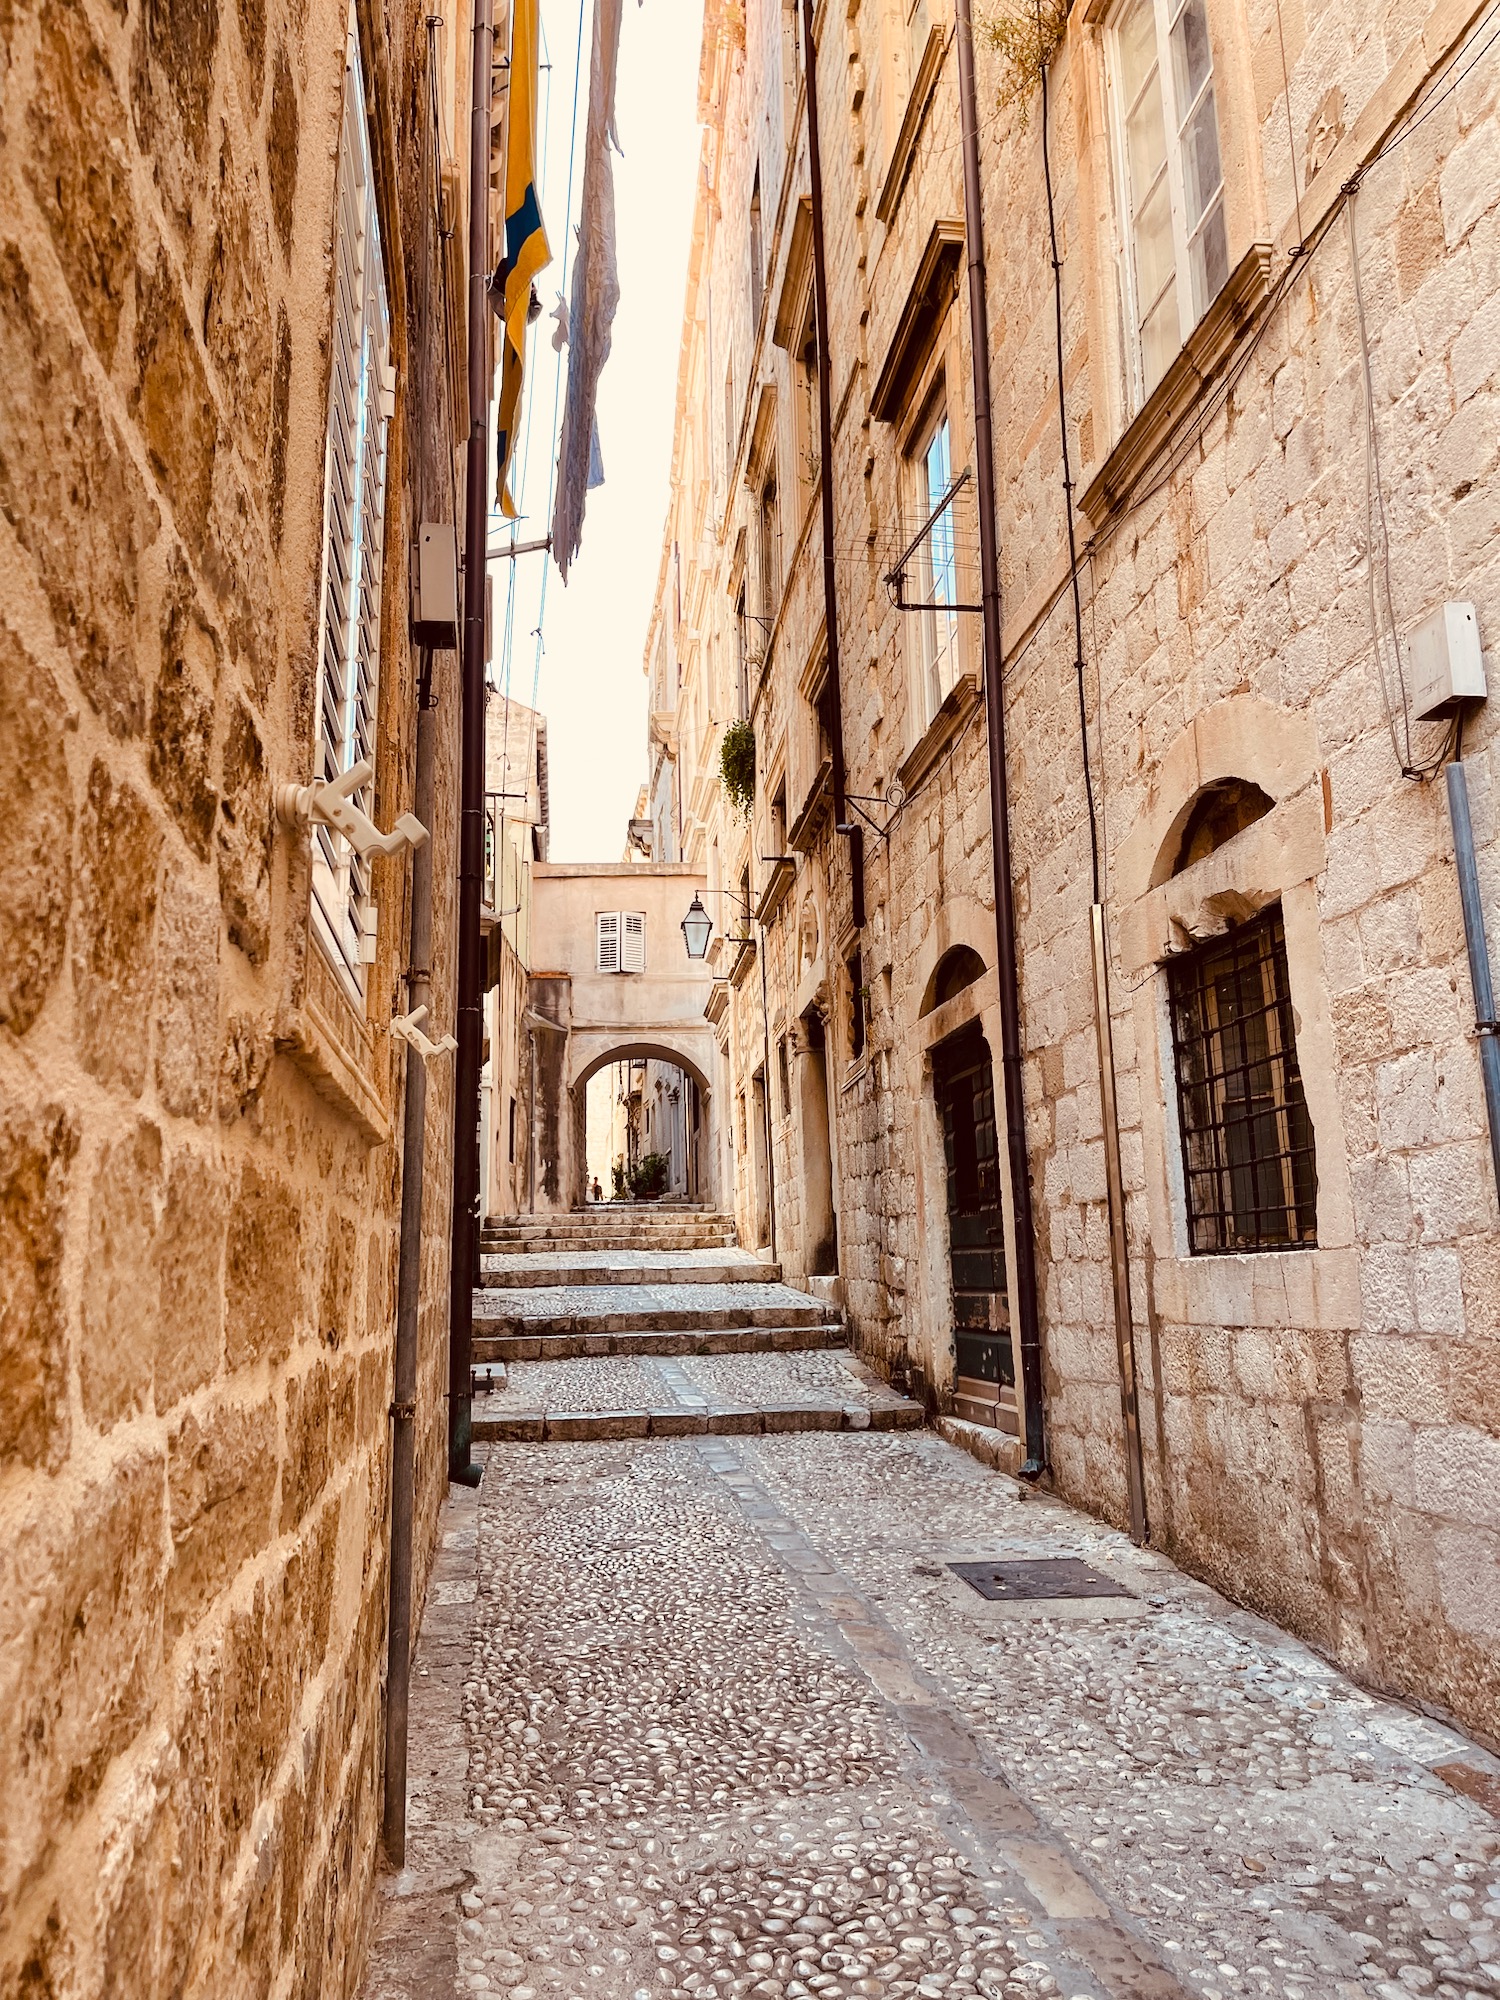 a stone alleyway with stone buildings